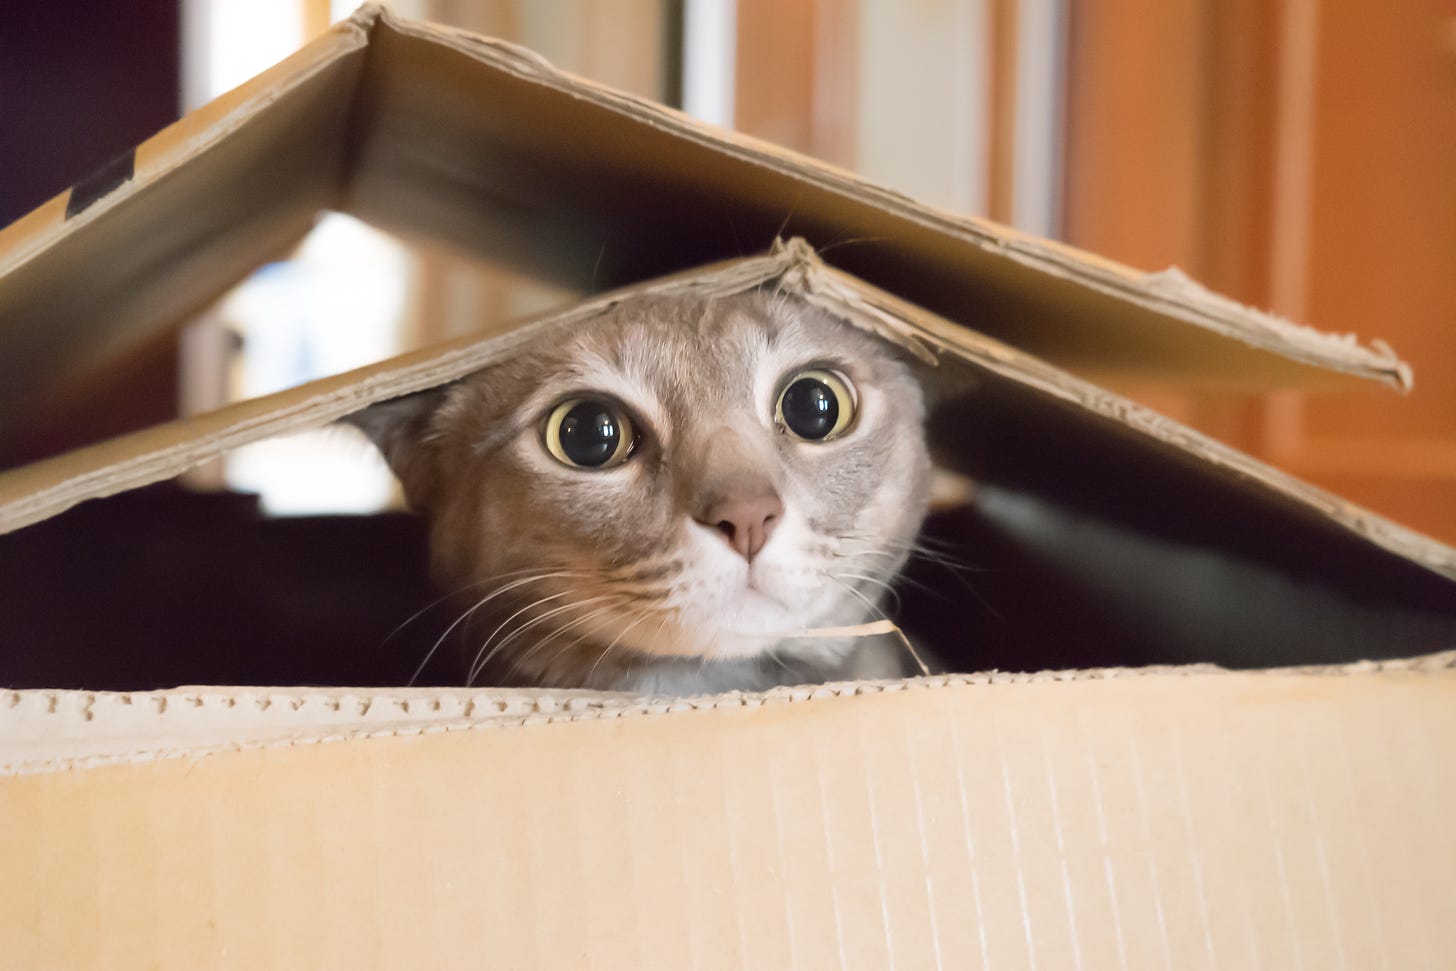 Cats love boxes because the confined space makes them feel safe • Earth.com